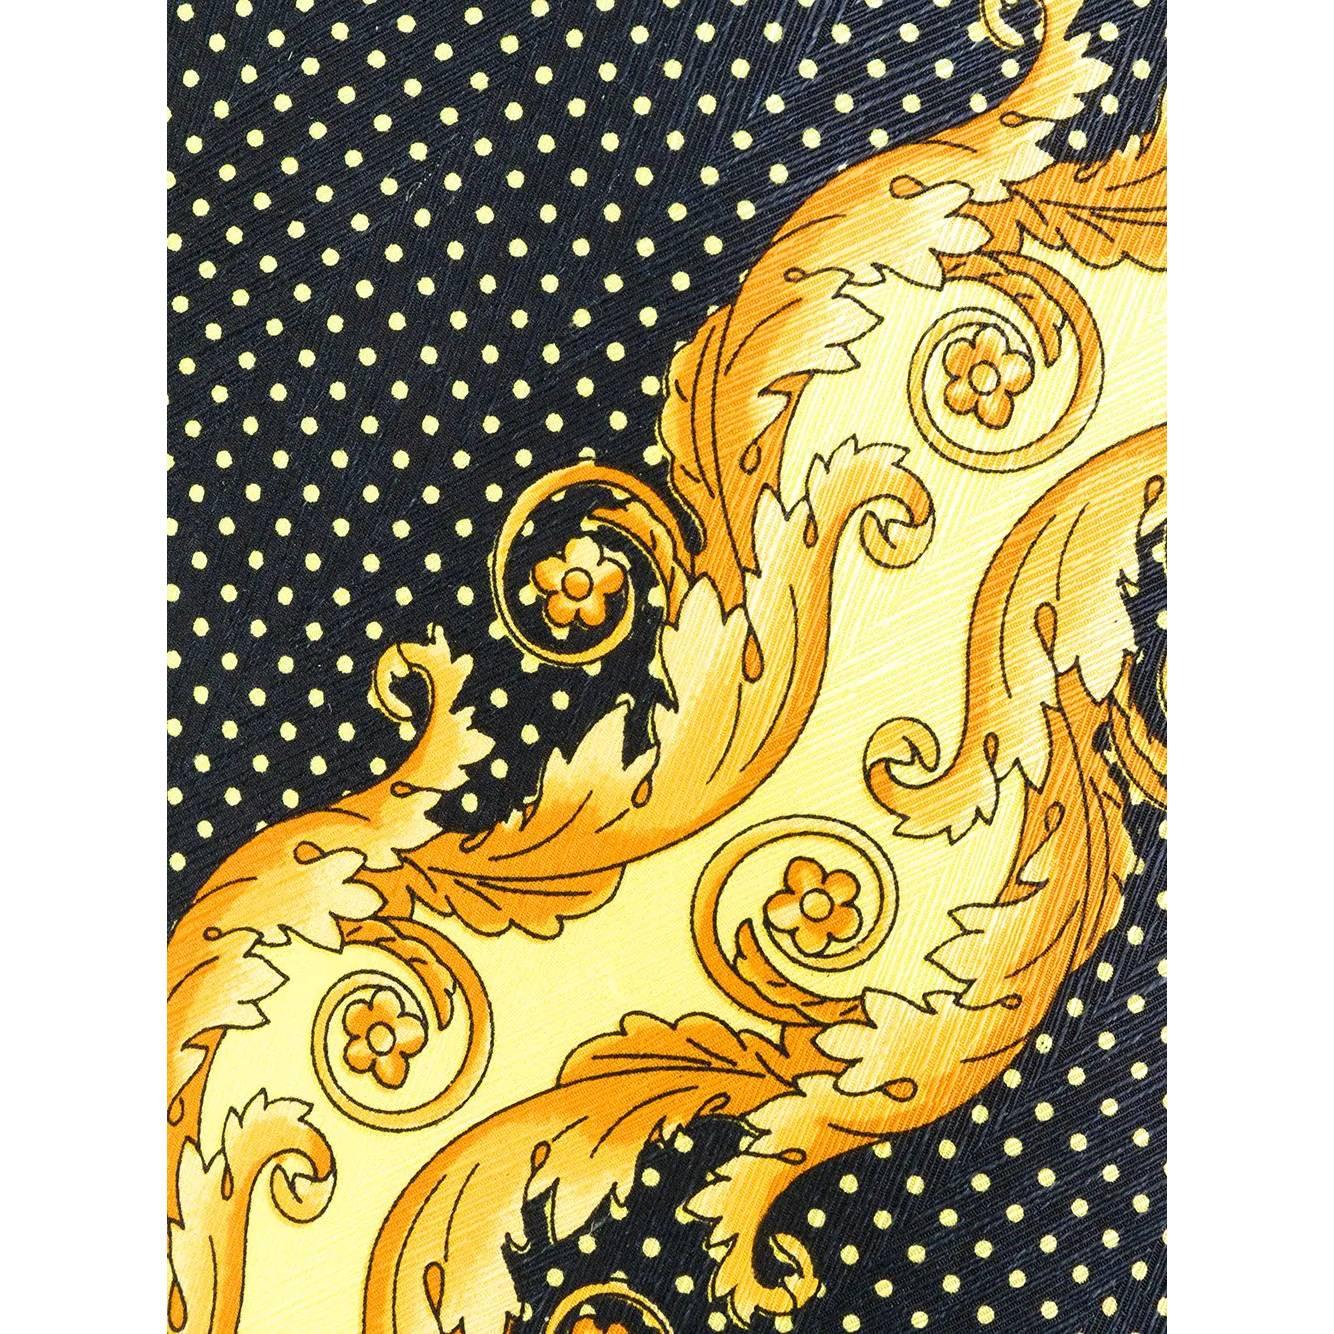 Versace black silk tie with white polka dots and contrasting yellow and gold baroque print motif. Pointed design.

Years: 90s

Made in Italy

Width: 9,5 cm
